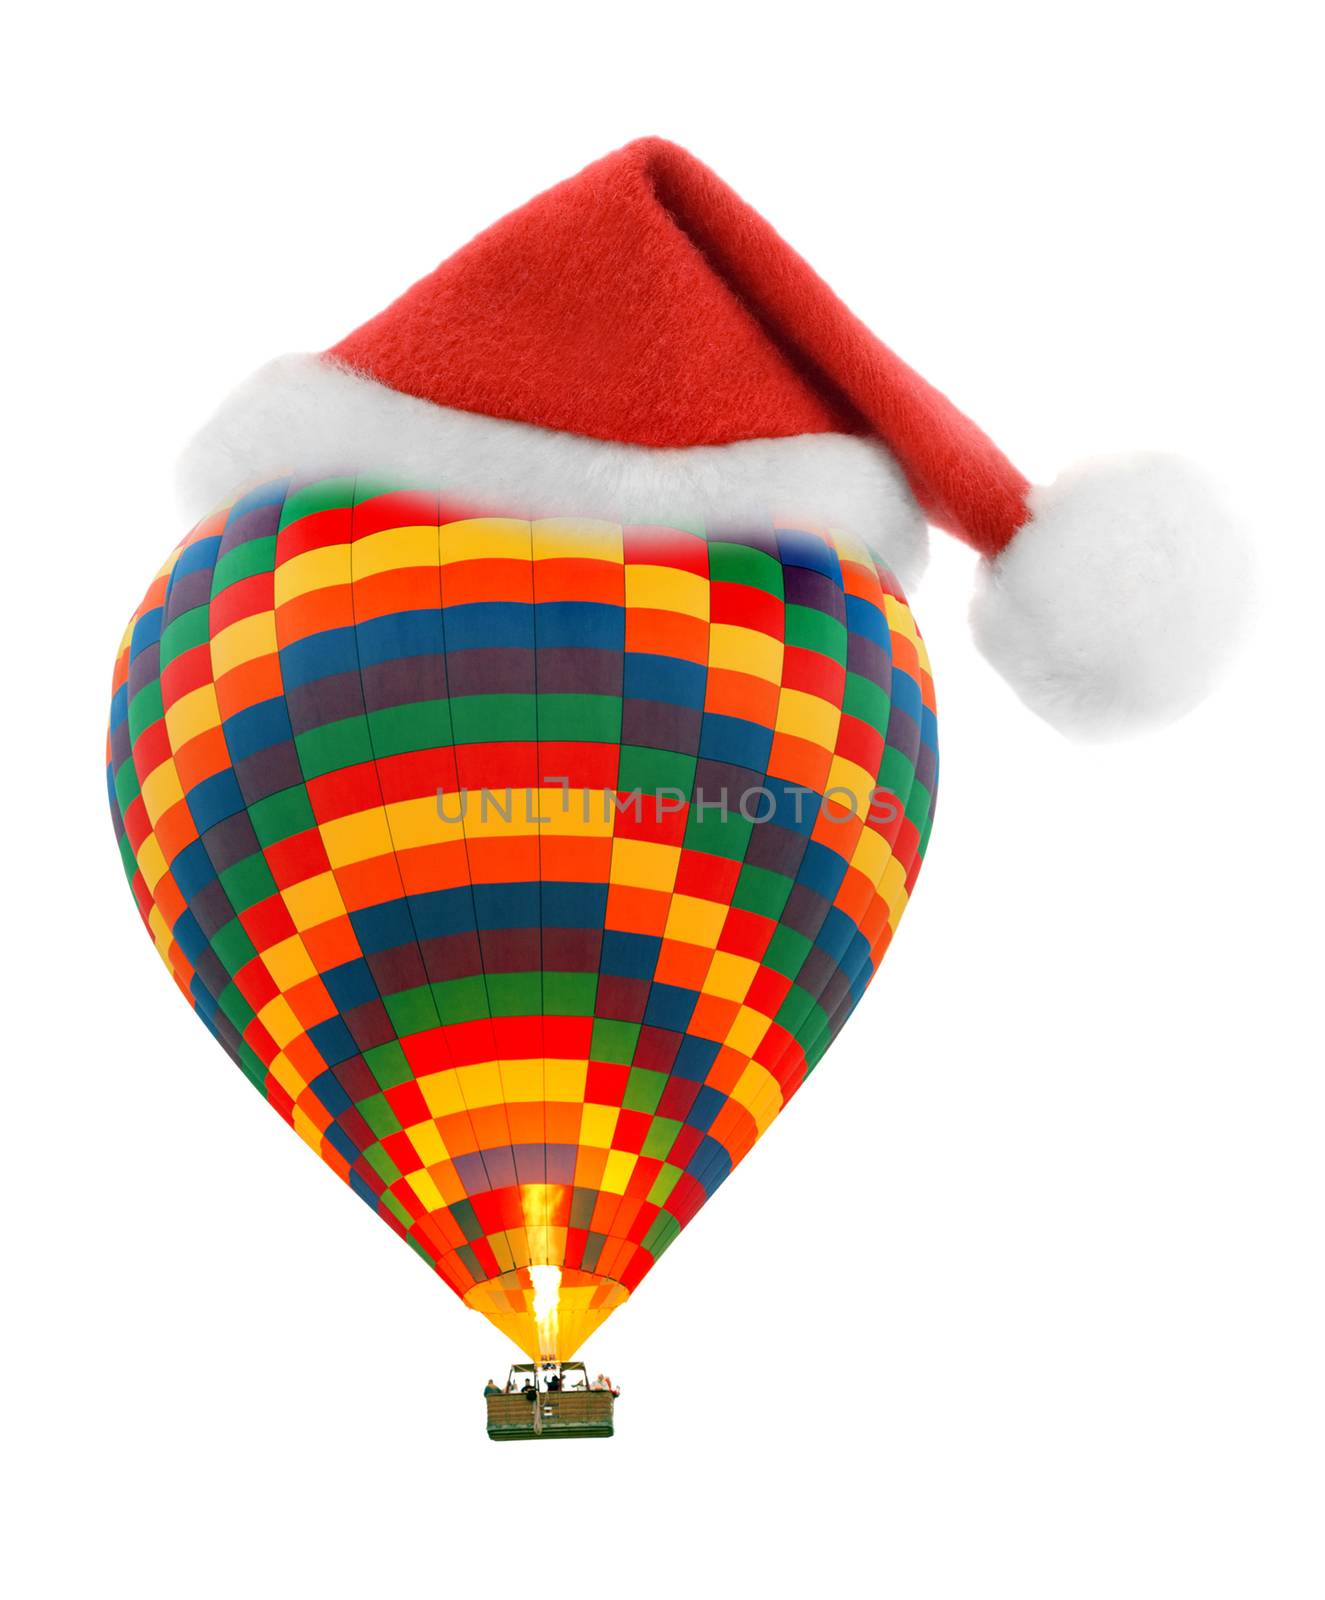 Santa hat on Hot air xmas colorful balloon isolated on white background